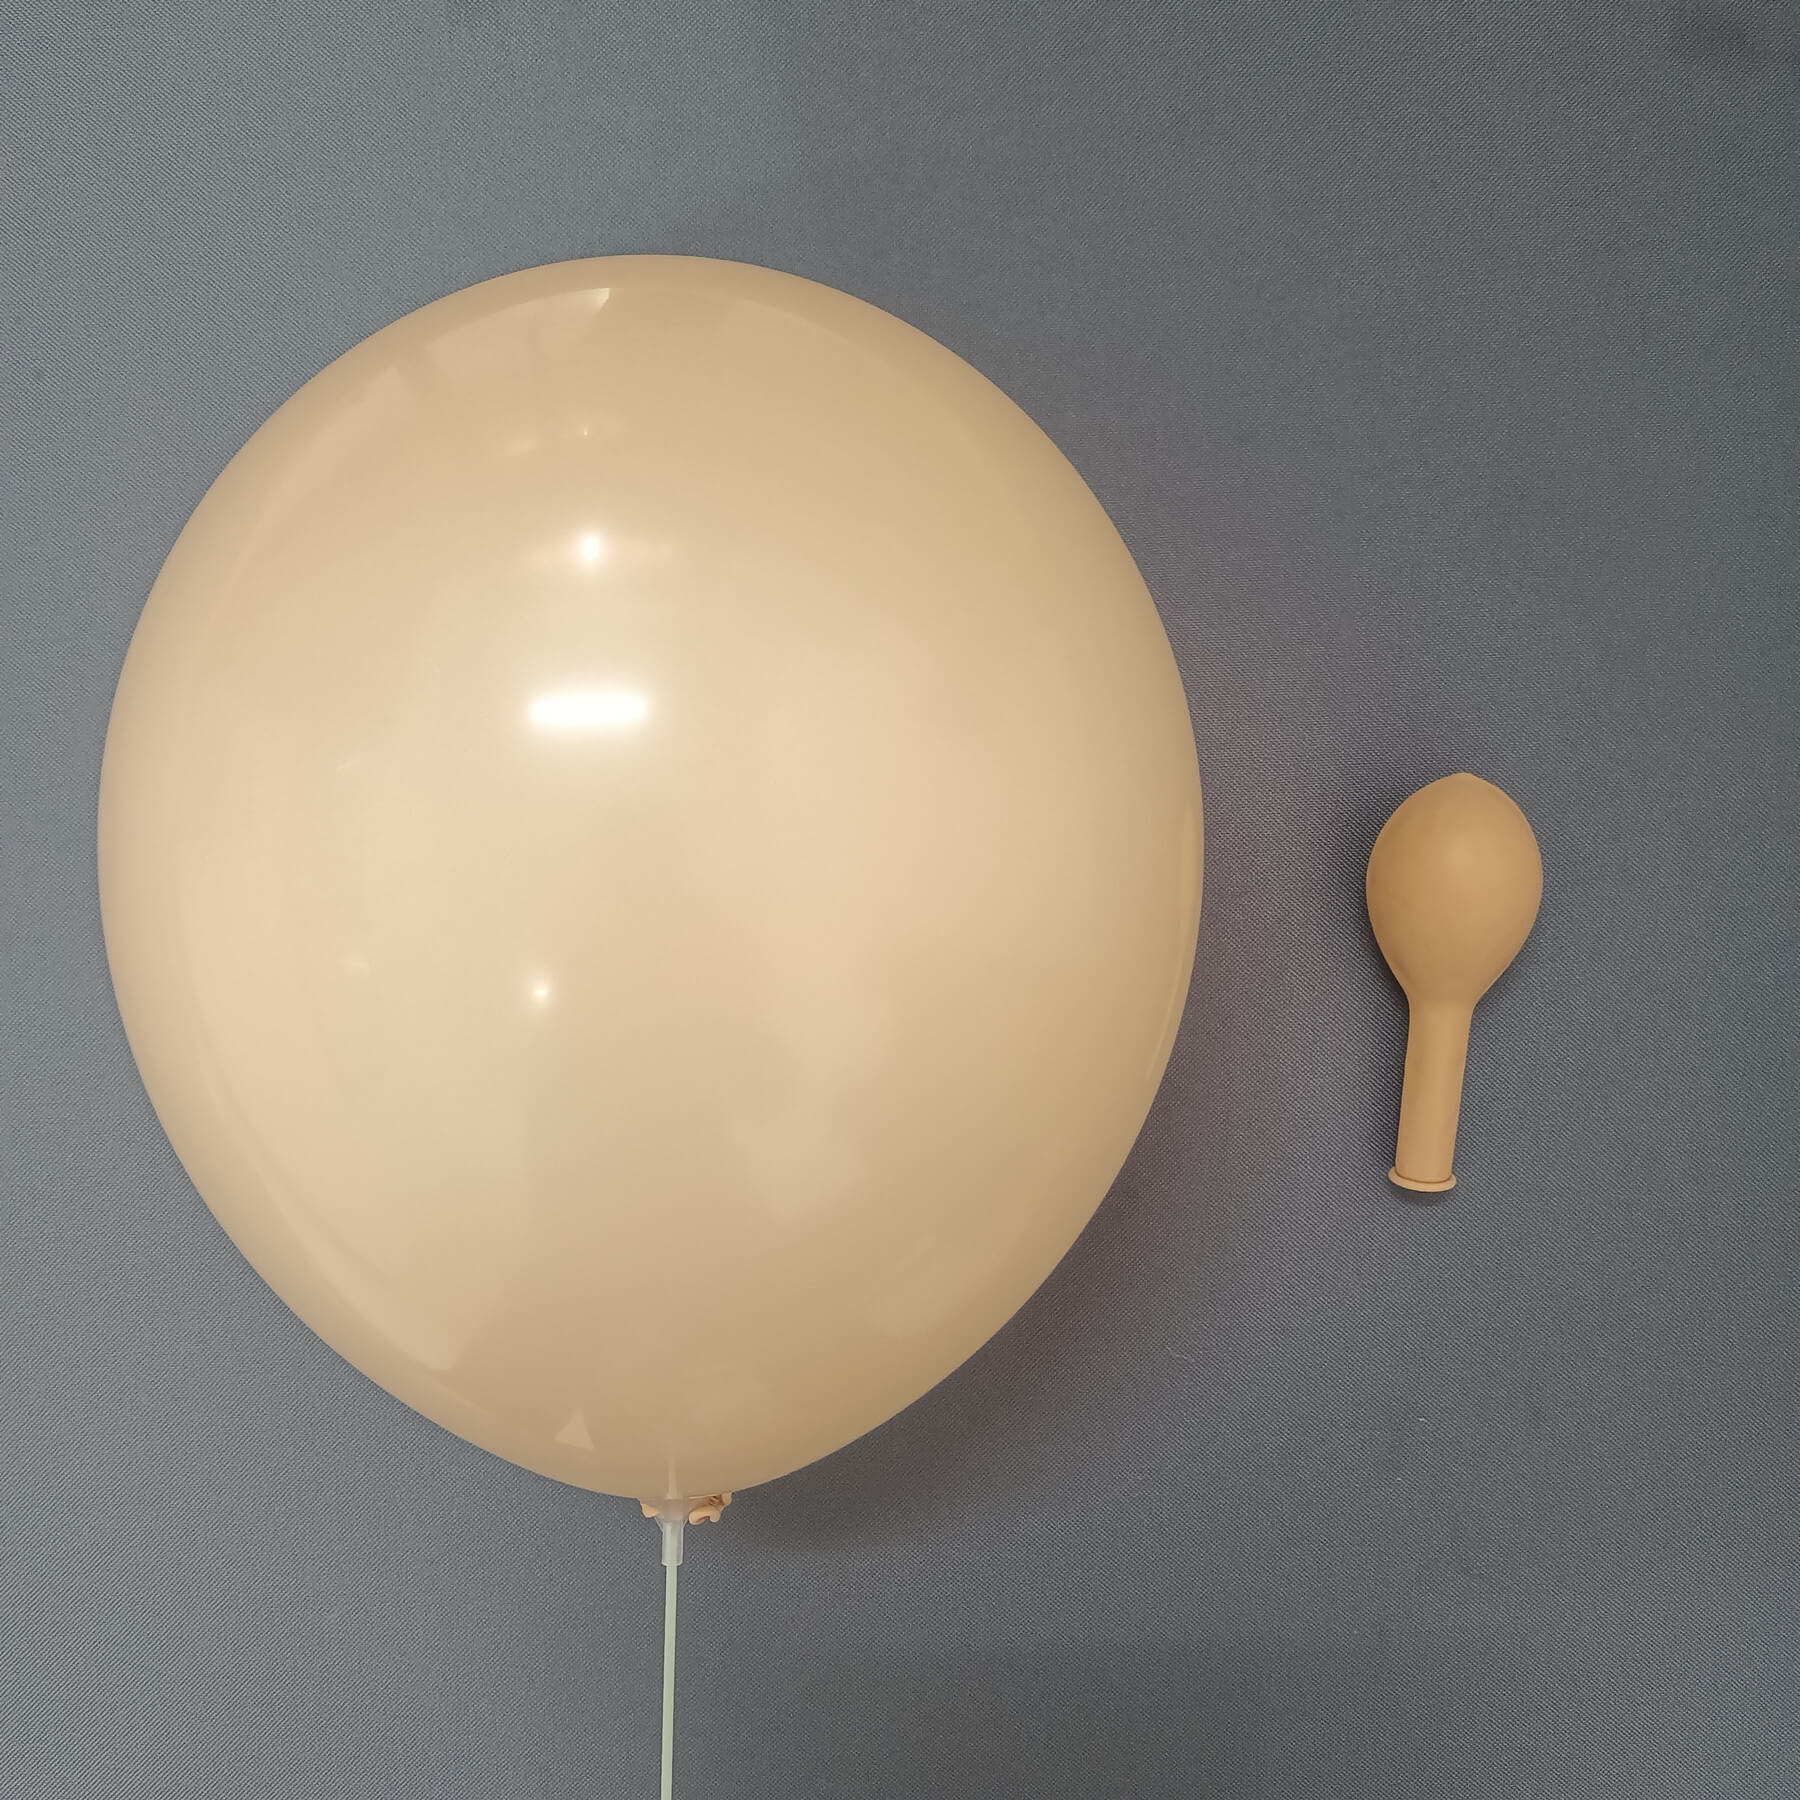 Retro Round Balloons for Birthday Parties and Events